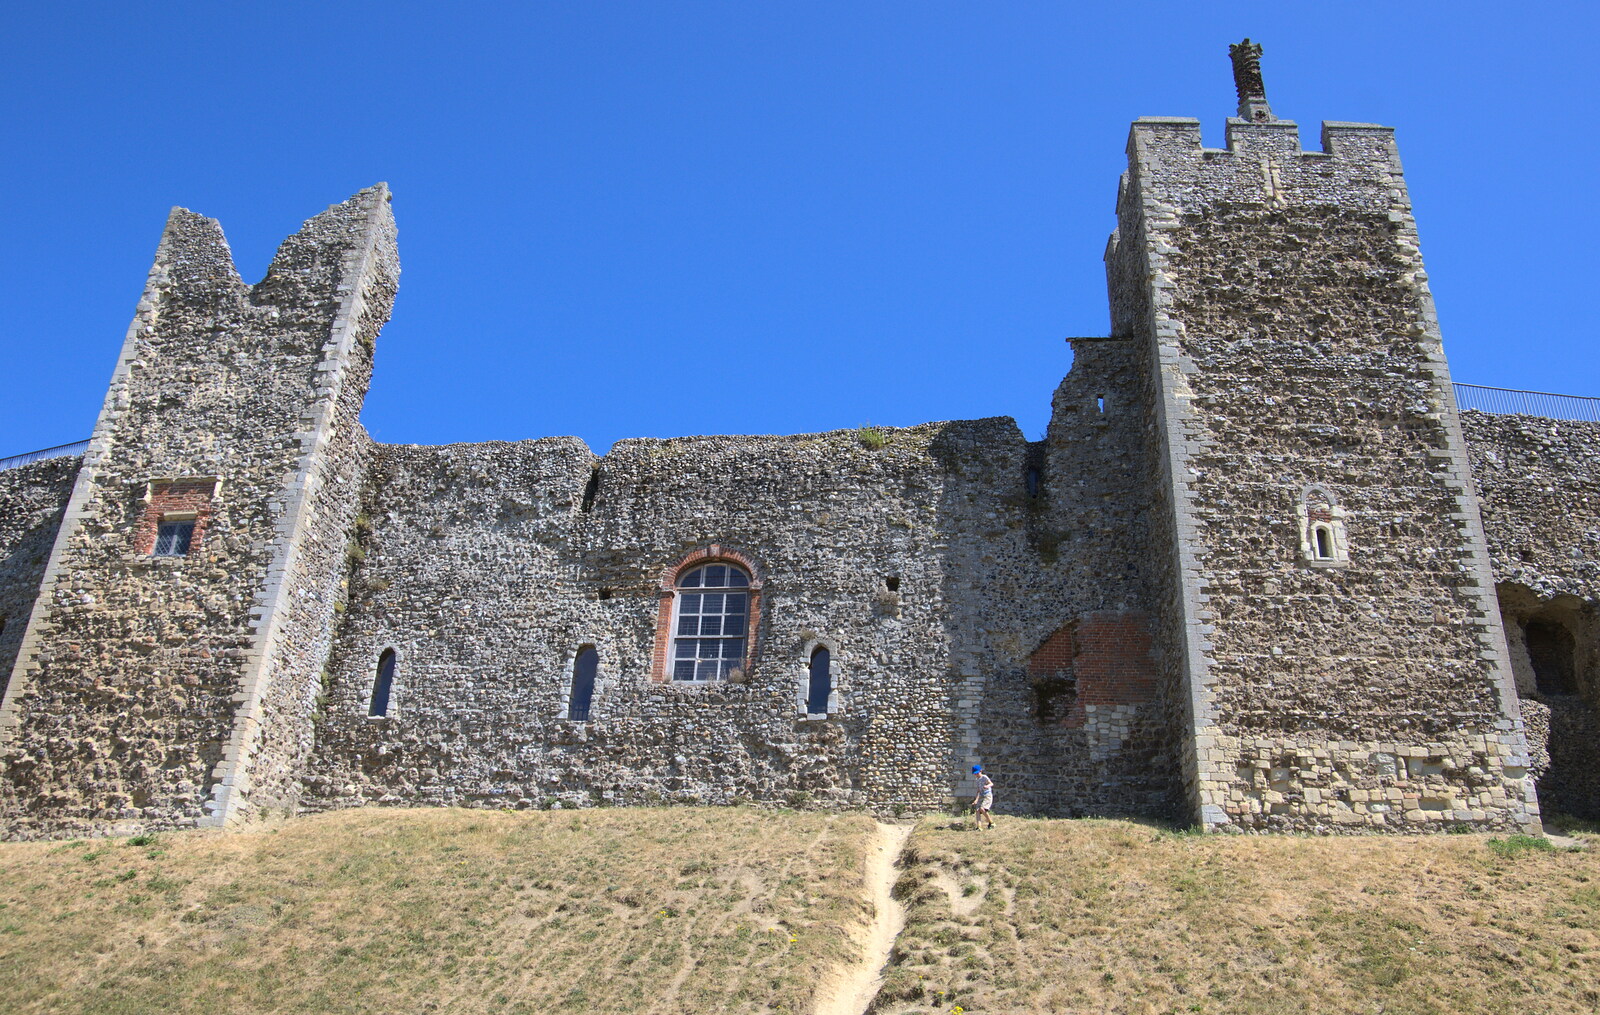 Fred is a dot by the castle walls from A Postcard from the Castle on the Hill, Framlingham, Suffolk - 14th July 2018